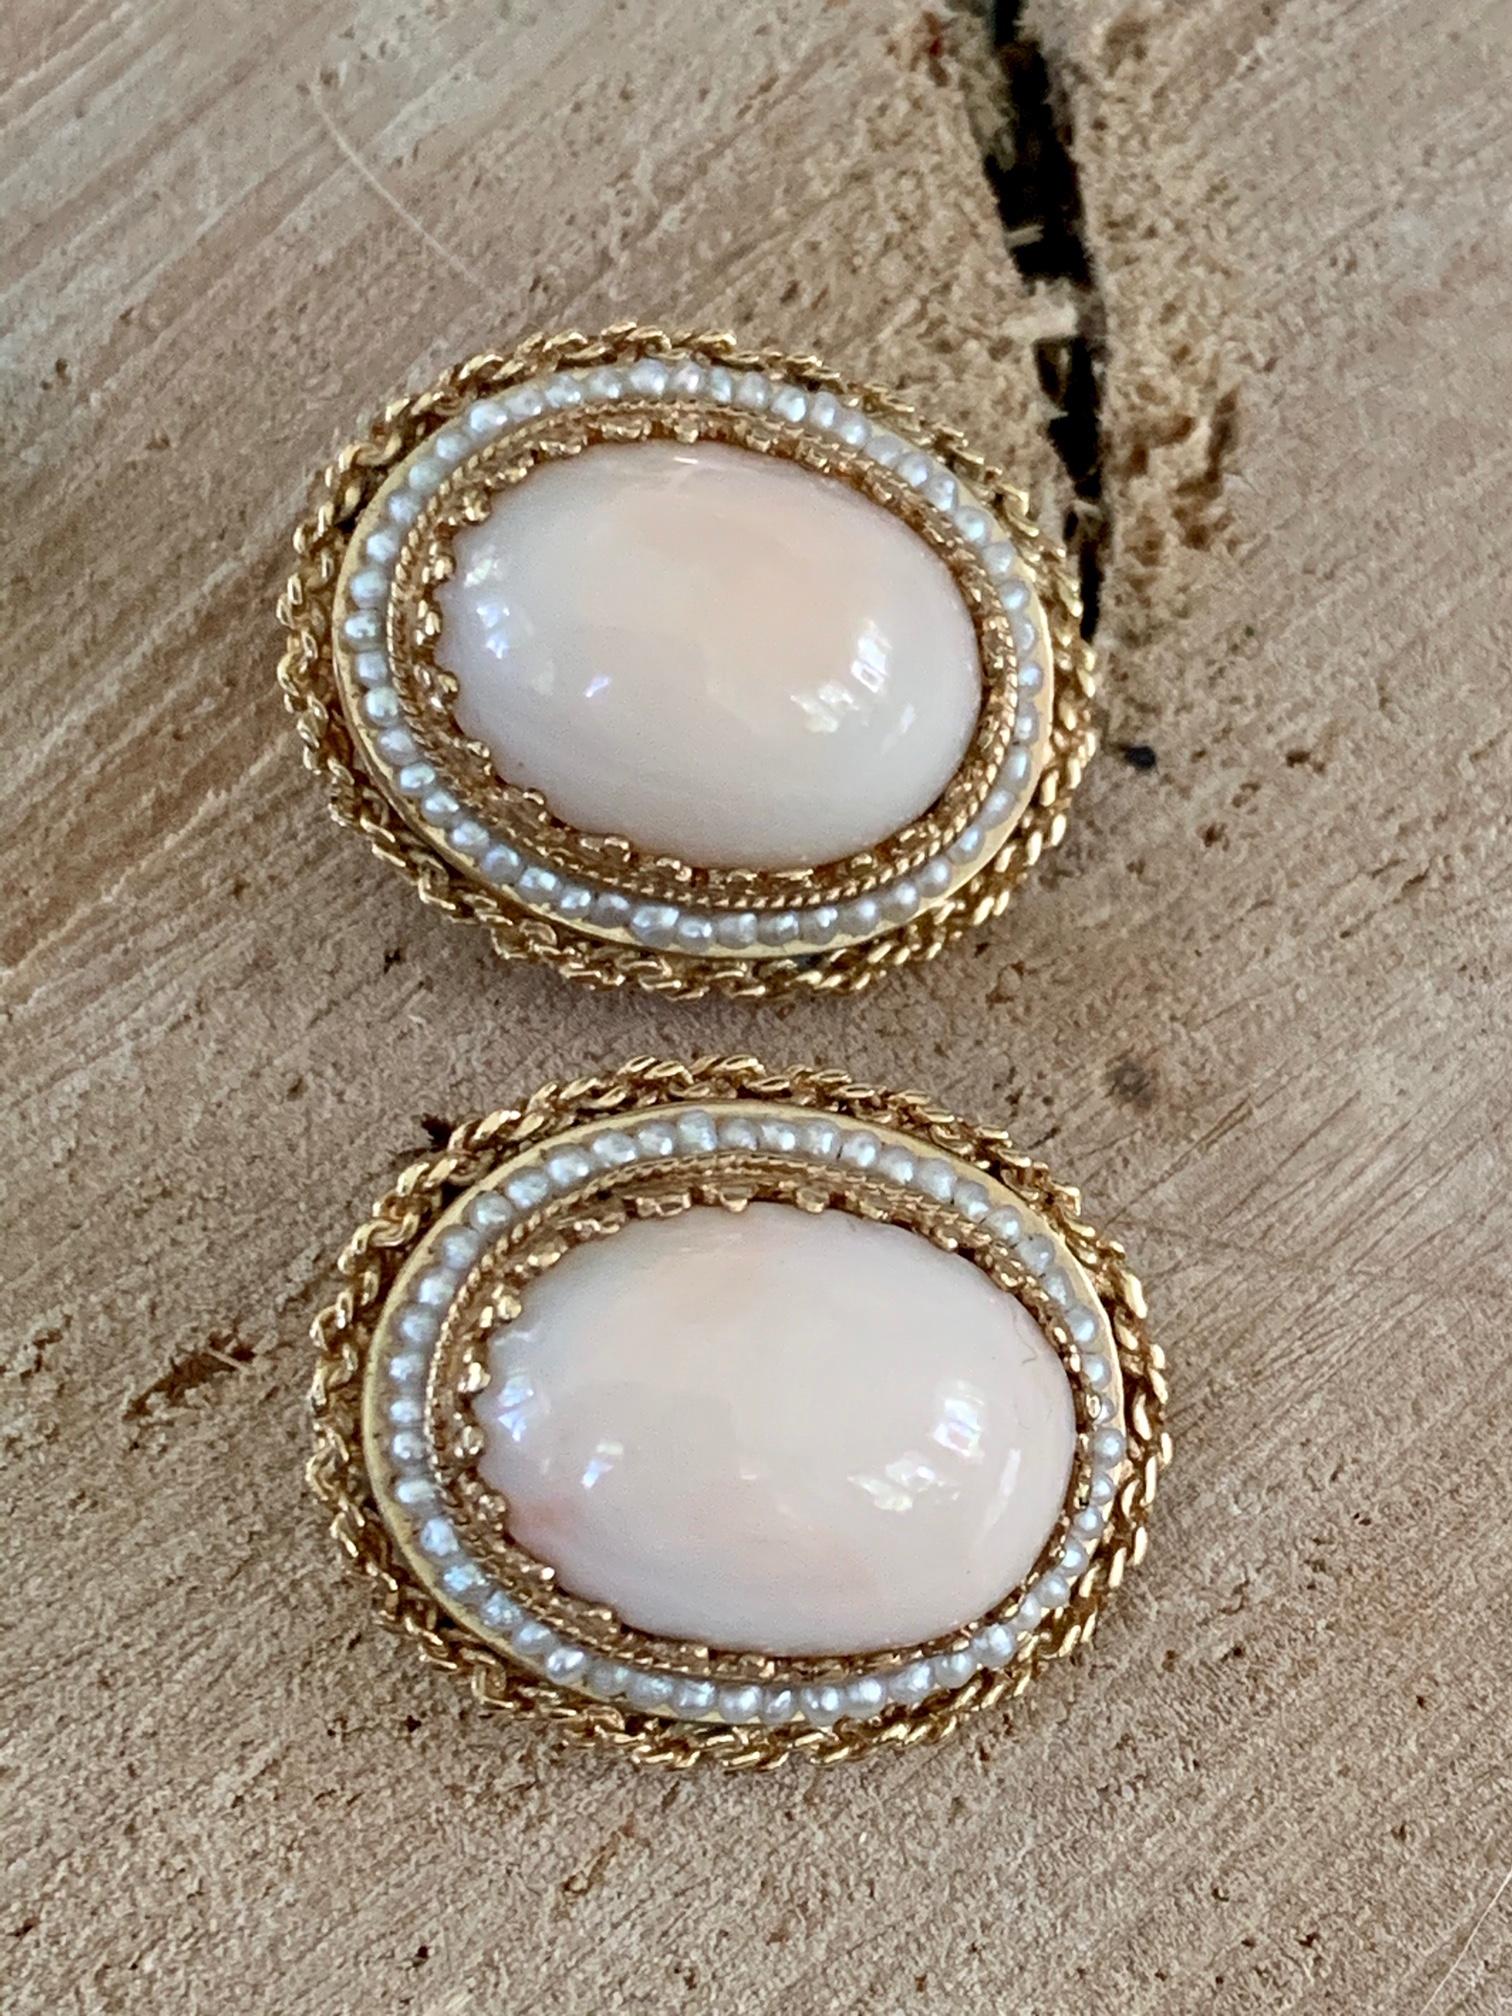 Fabulous vintage Angel Skin coral clip-on earrings are set in 14k gold with a seed pearl halo.
They are stamped 14k.
The oval Angel Skin Coral Cabochon stone size is 18 x 14 mm.
The earrings measure 1 1/8